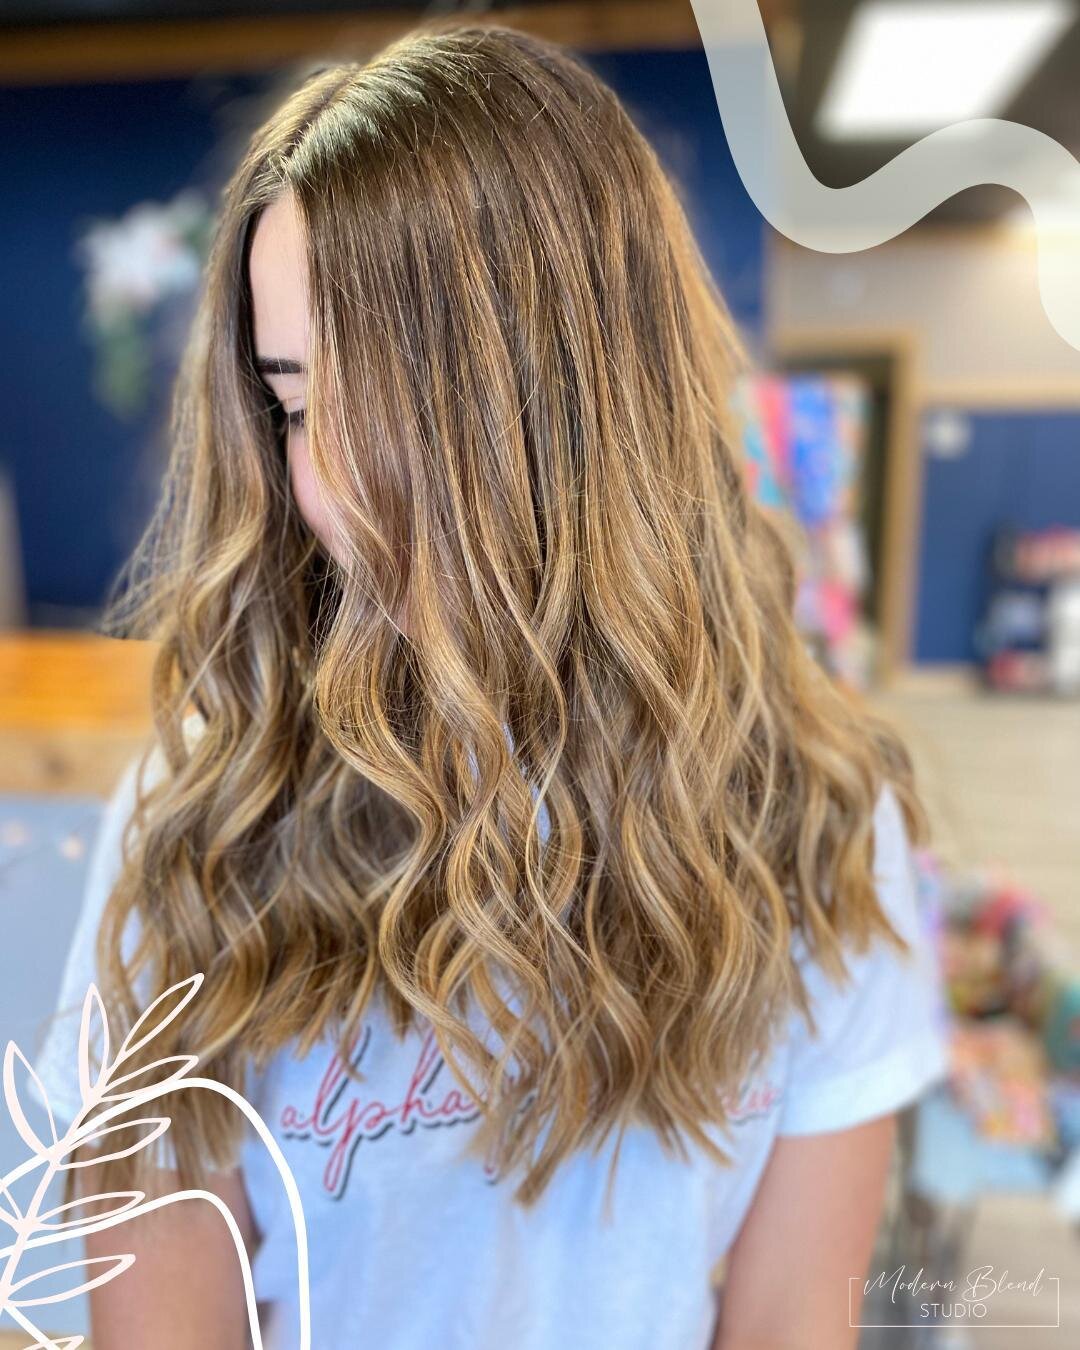 All that H A I R 💁&zwj;♀️ Have you booked your next hair appointments yet? Contact us at (810) 652-6069 to get you fall hair appointments on the calendar 🍂⁠
.⁠
.⁠
.⁠
.⁠
.⁠
#modernblendstudio #hairpainting #modernsalon #colormelt #hairdresser #ombre